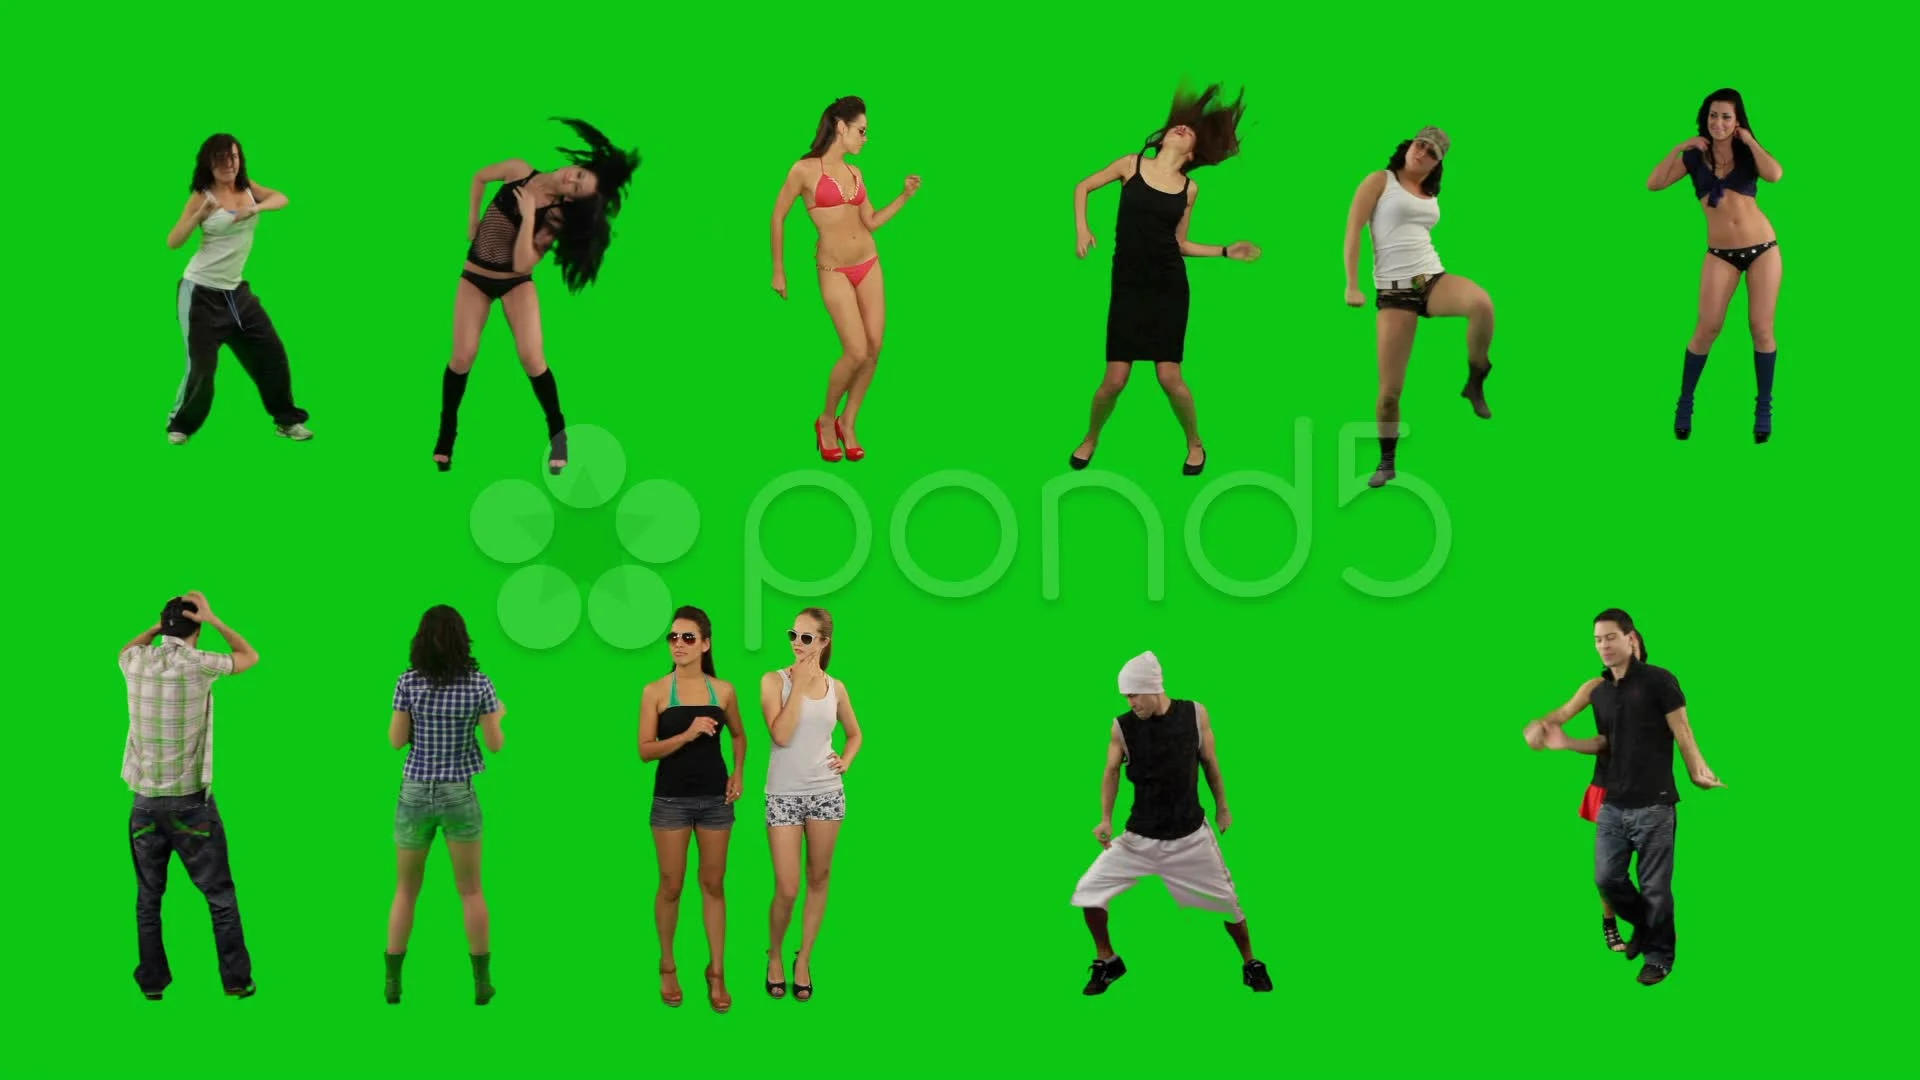 A lot of people dancing on green screen | Stock Video | Pond5